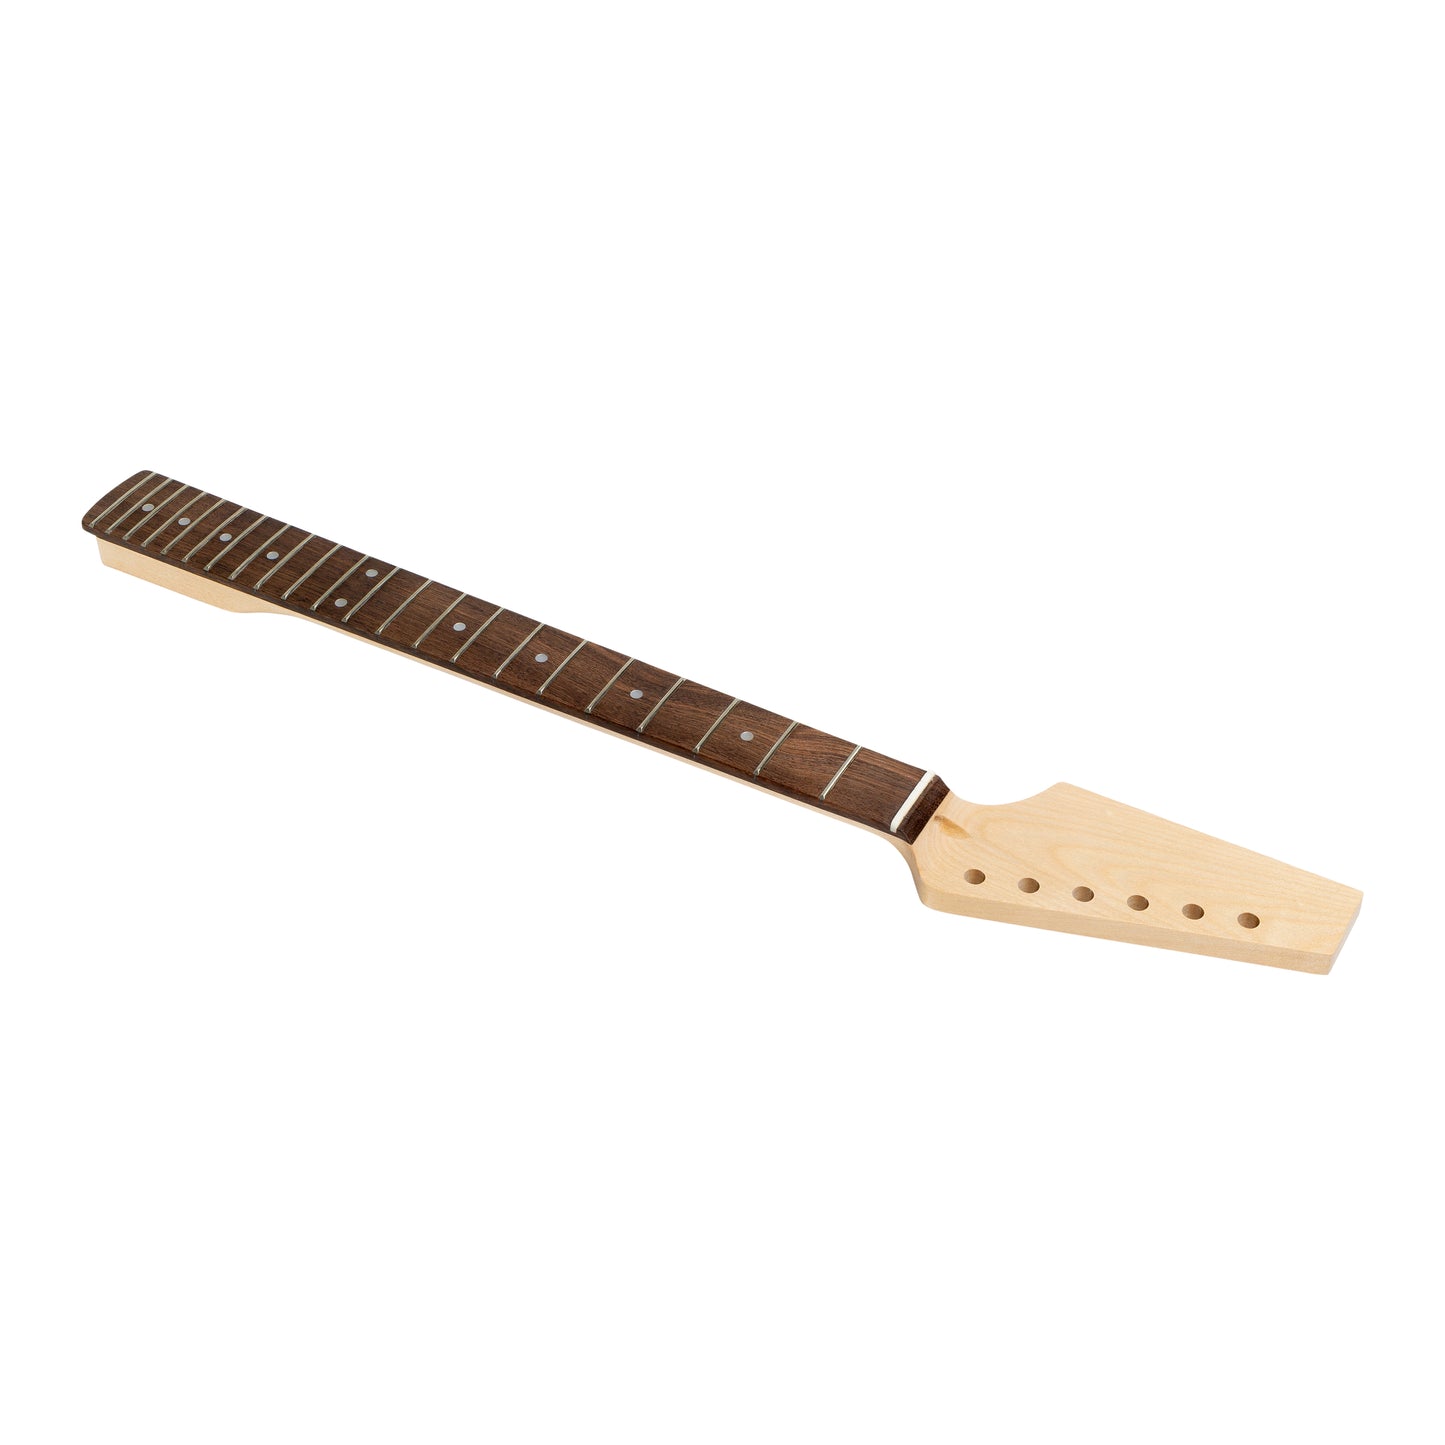 AE Guitars® S-Style Guitar Neck 22 Frets Rosewood Reverse Headstock